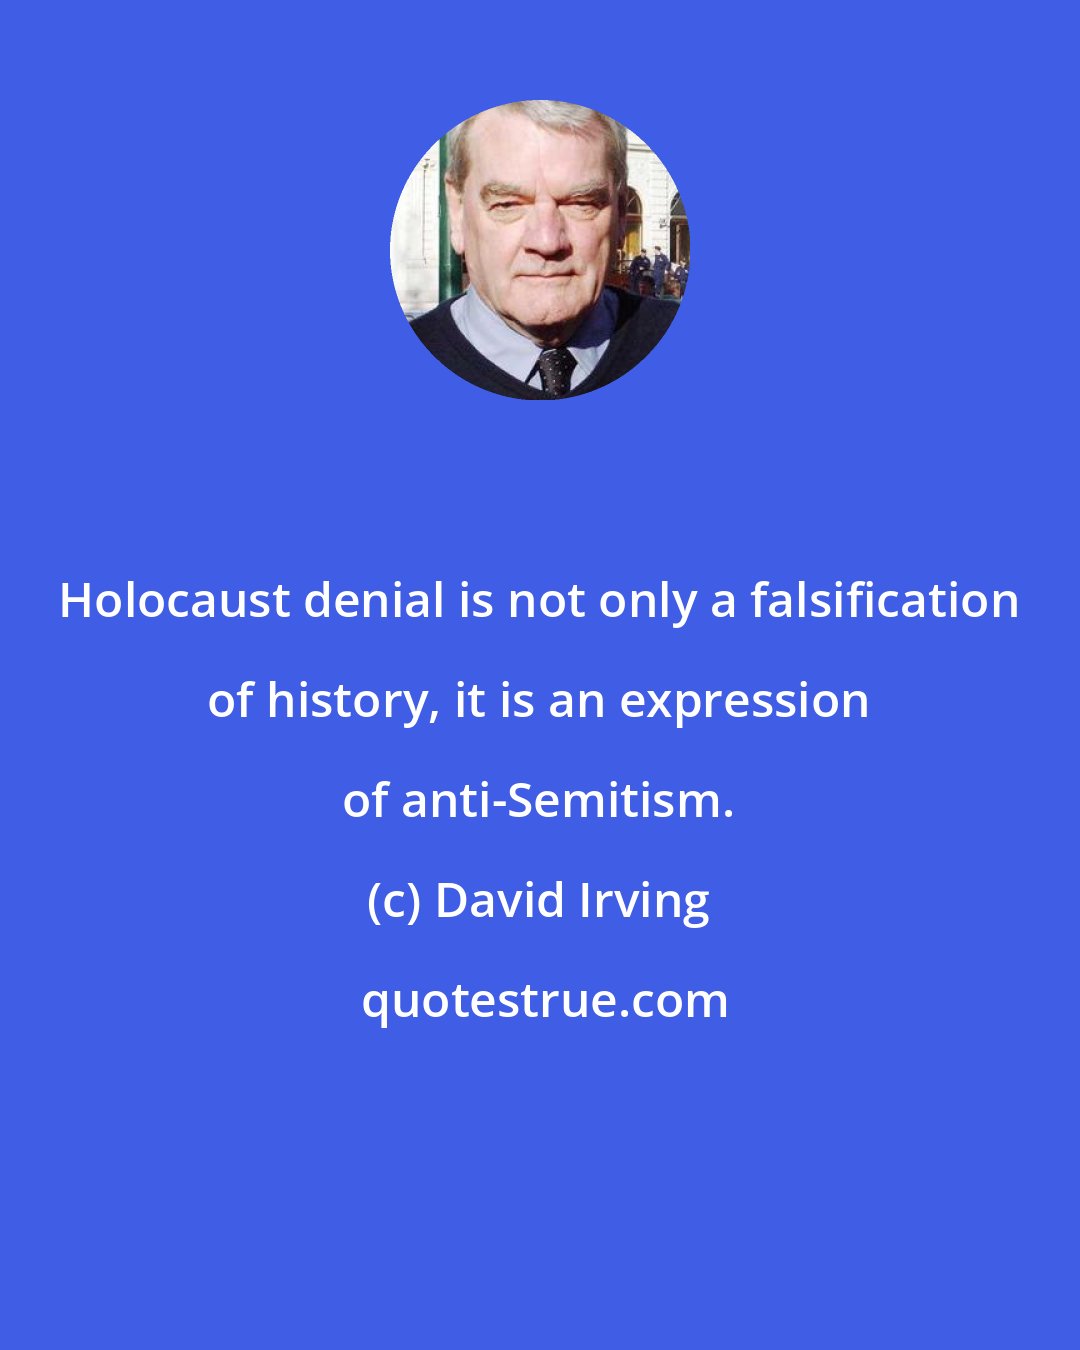 David Irving: Holocaust denial is not only a falsification of history, it is an expression of anti-Semitism.